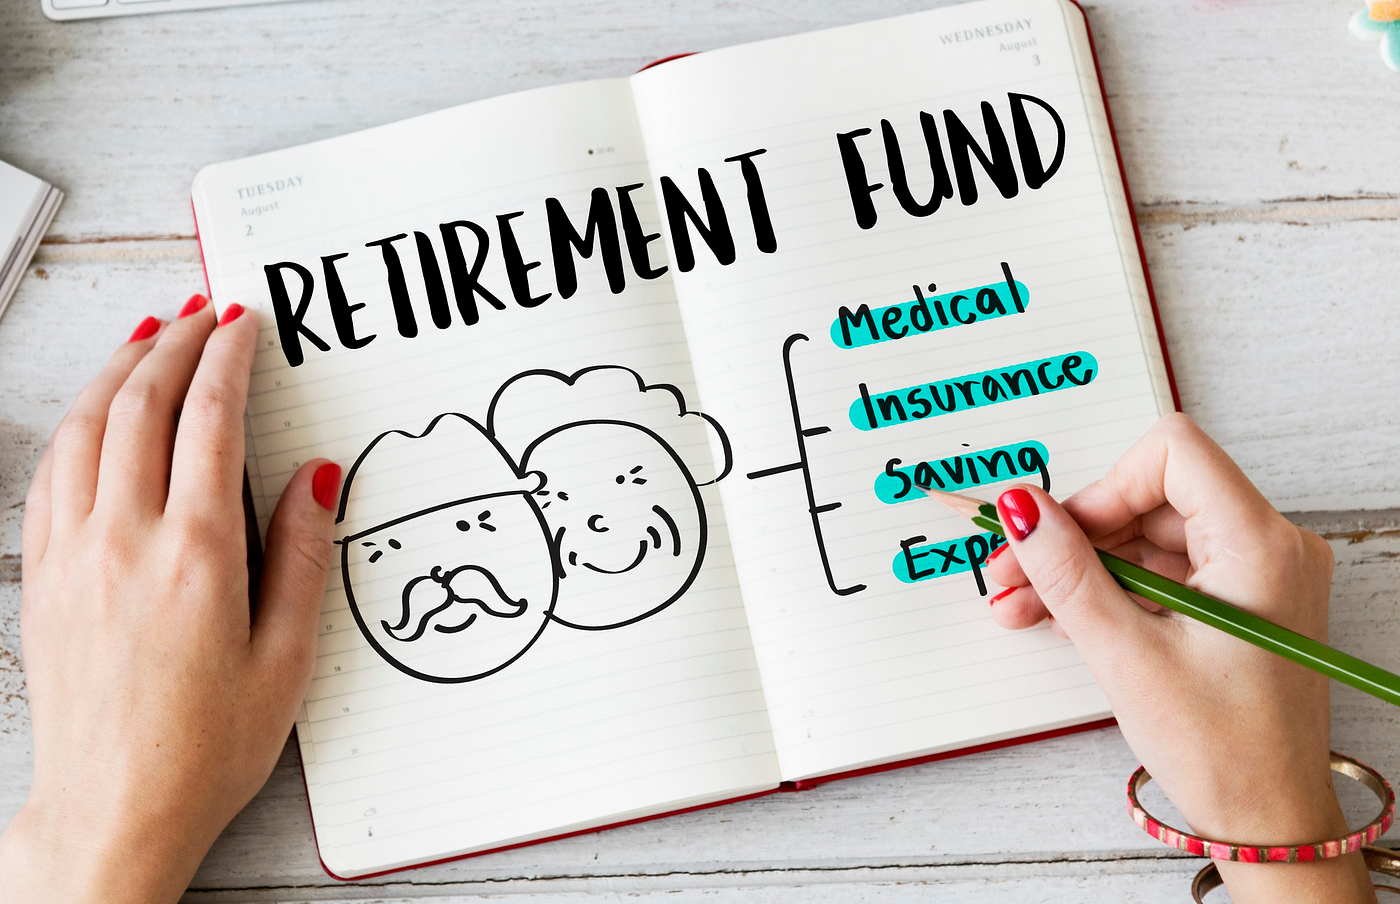 Future Retirement Planning Secure Your Financial Future